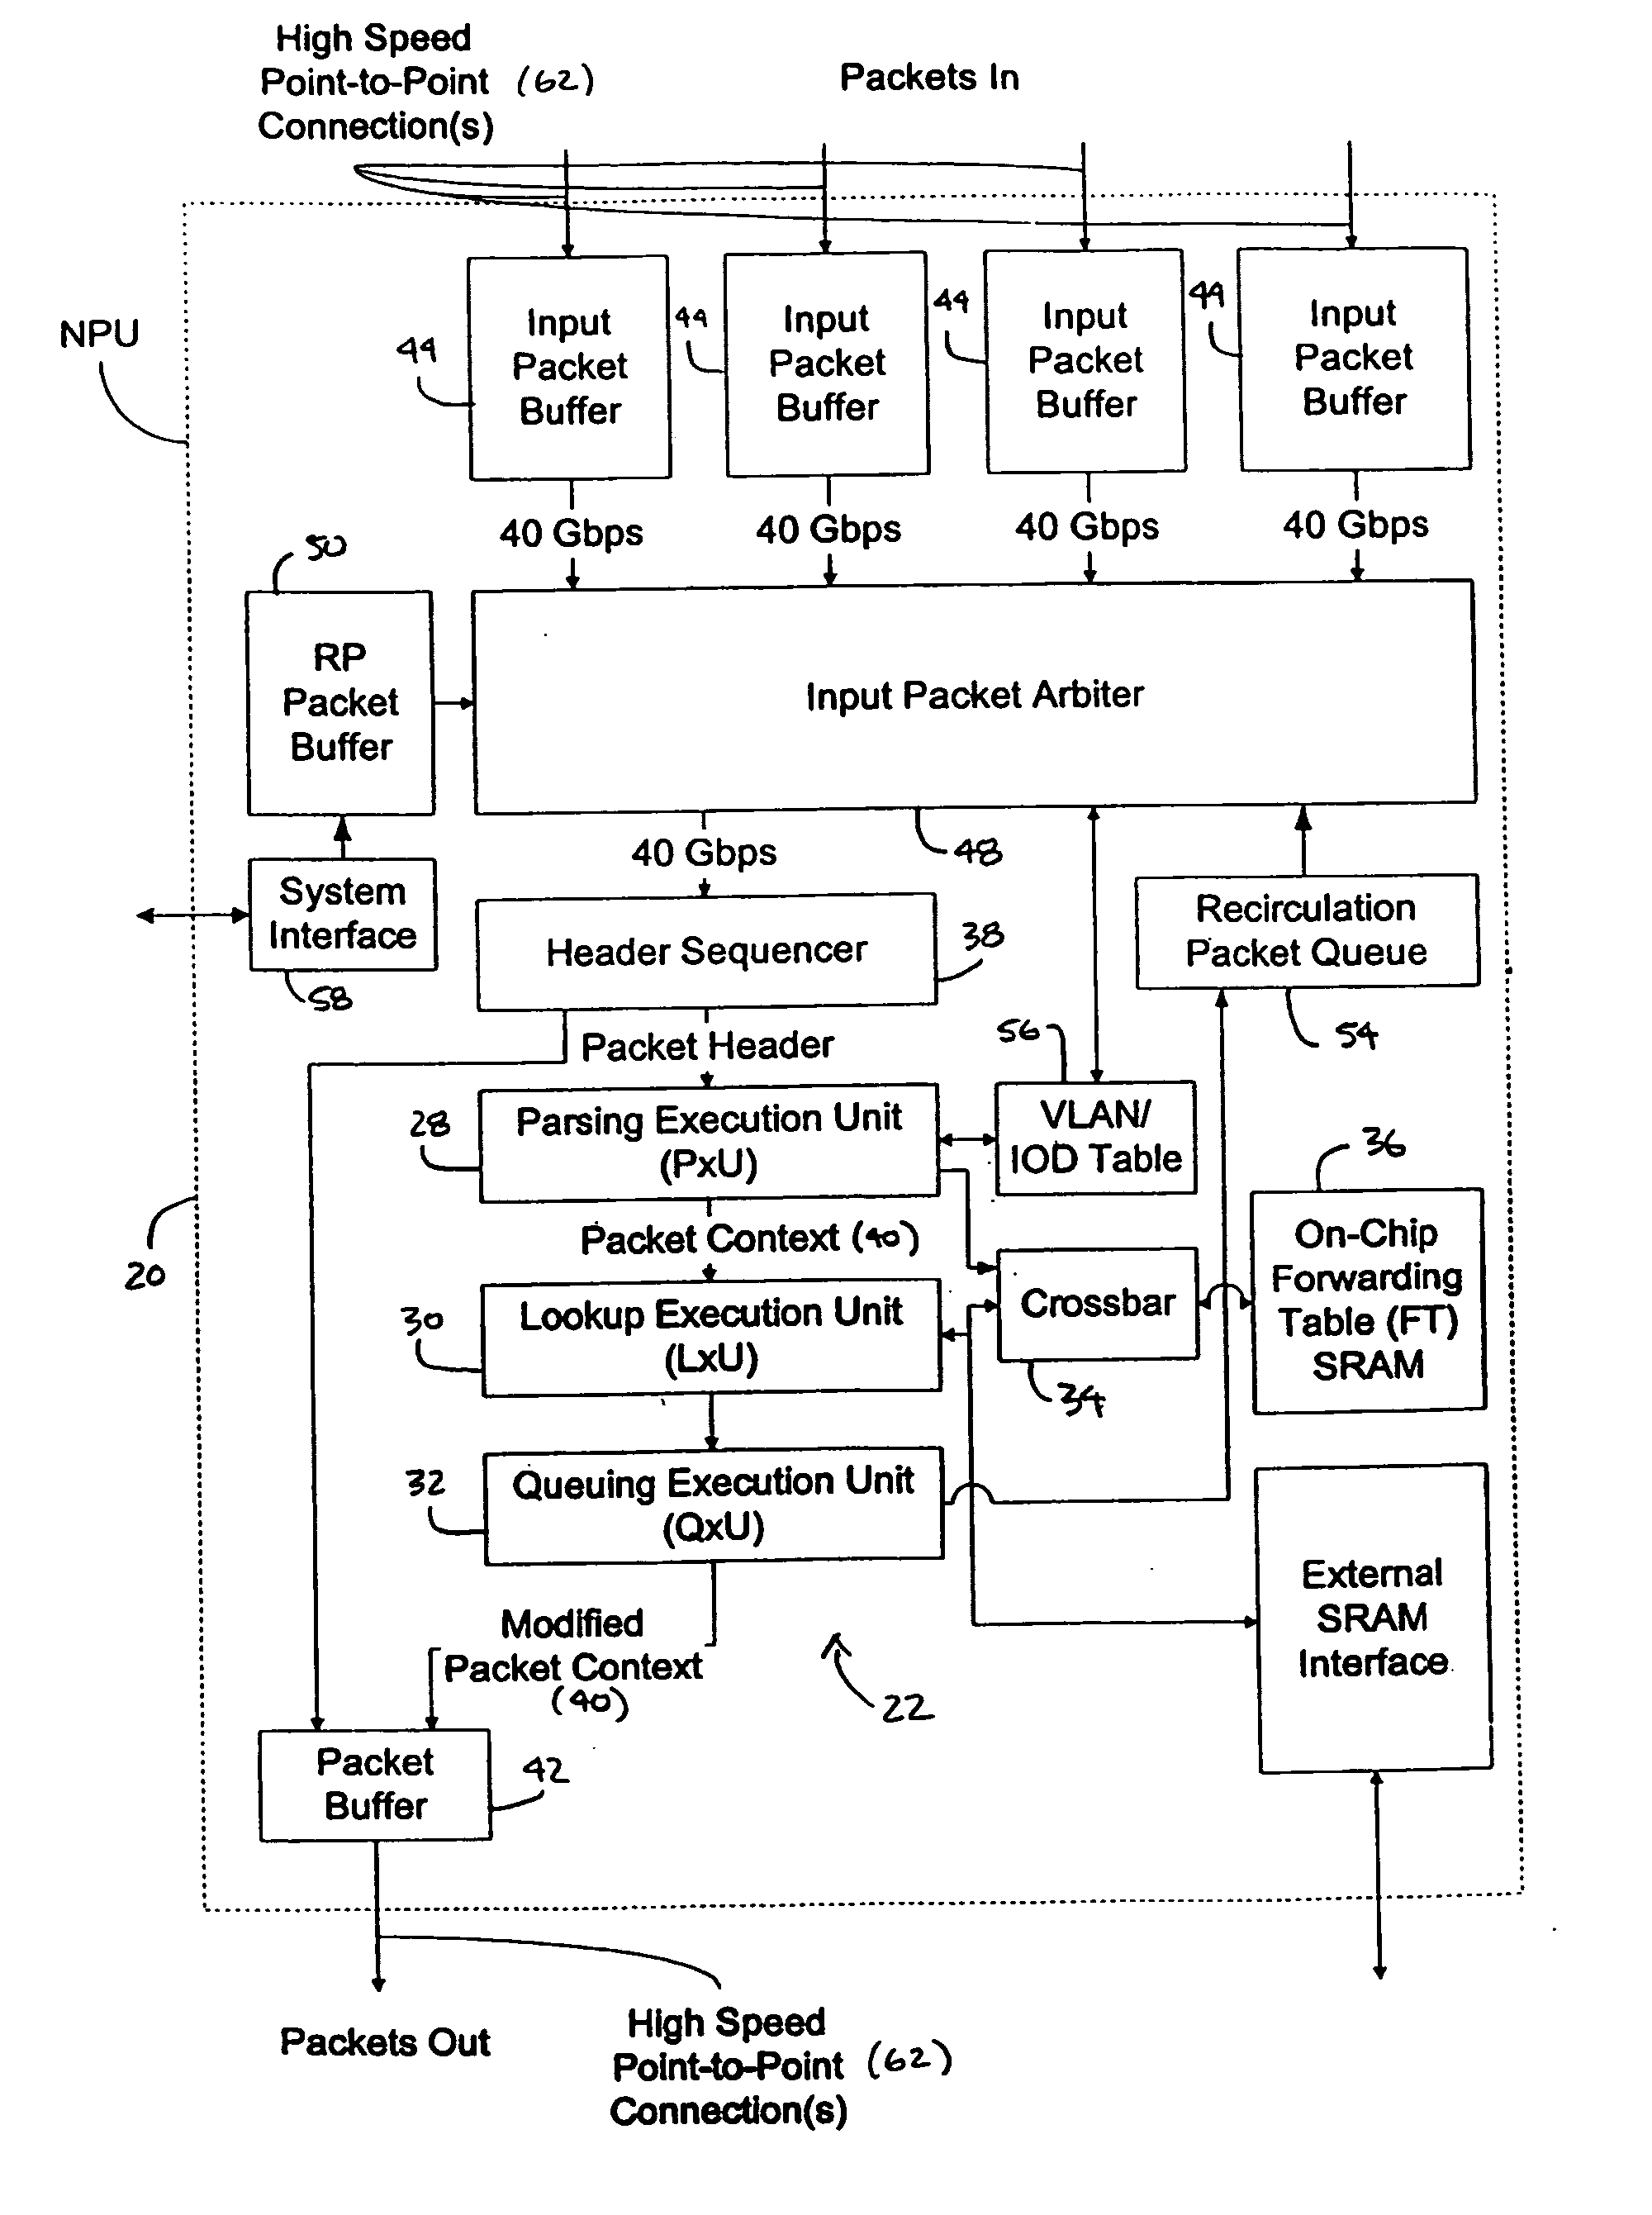 Processing unit for efficiently determining a packet's destination in a packet-switched network